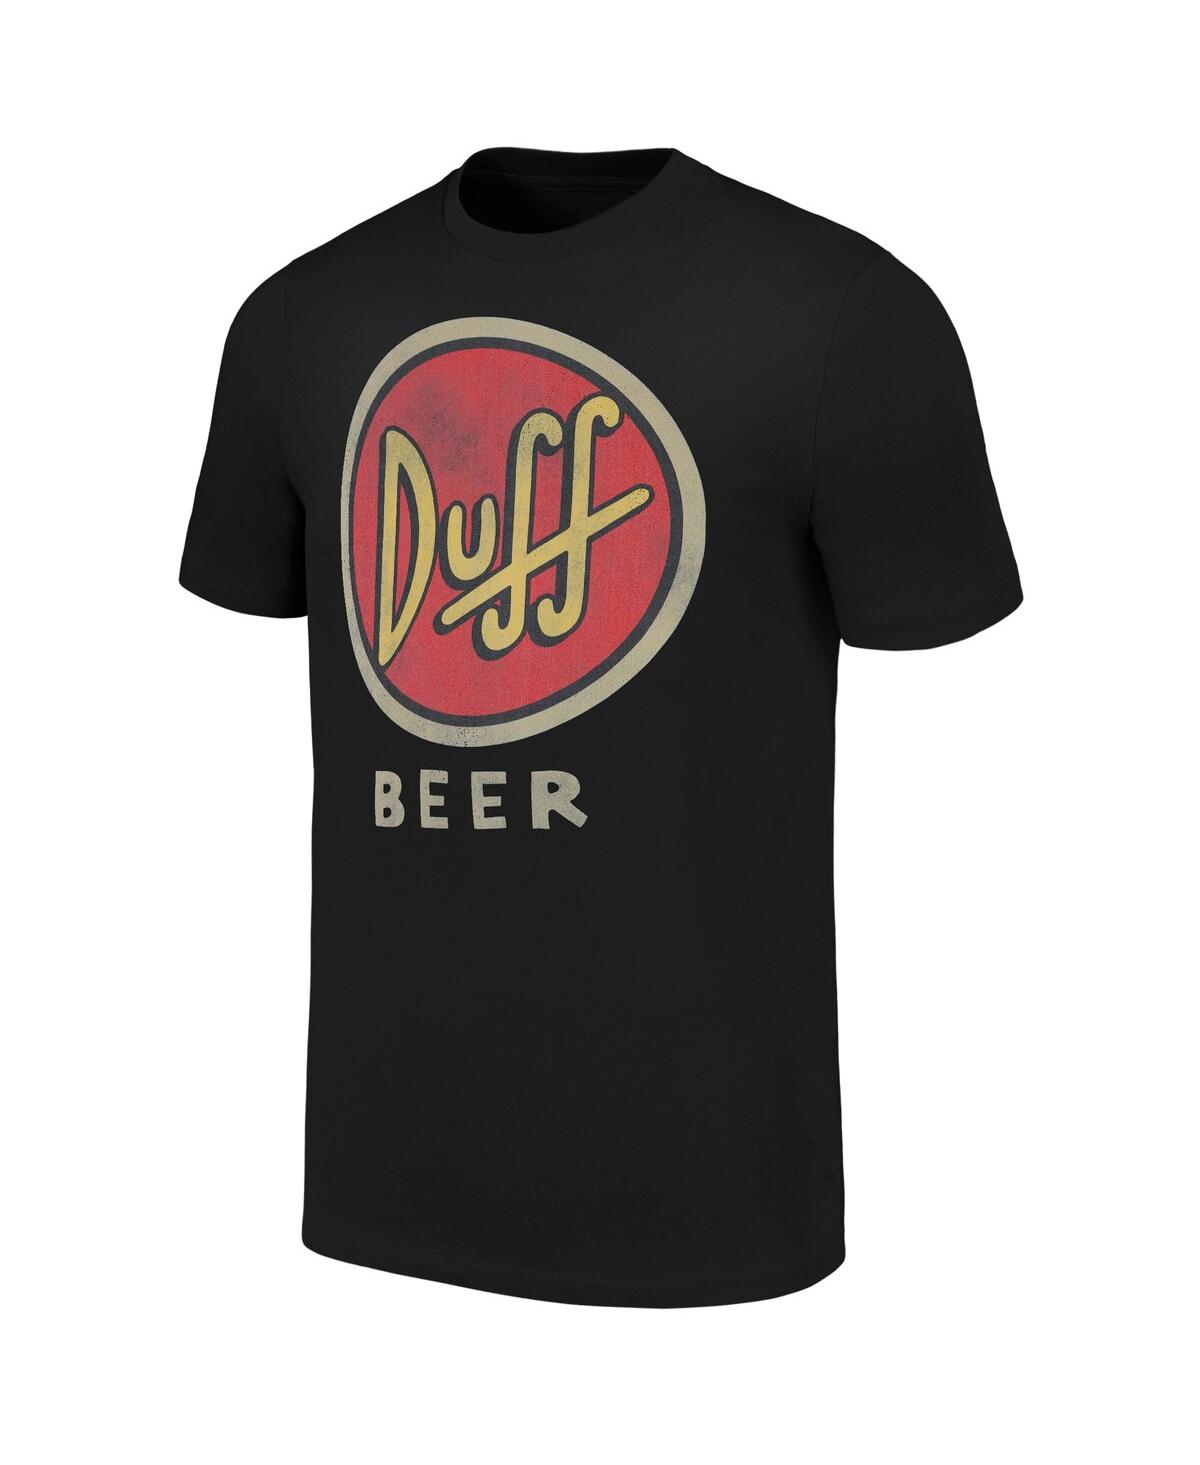 Shop Mad Engine Men's And Women's Black Distressed The Simpsons Vintage-like Duff T-shirt